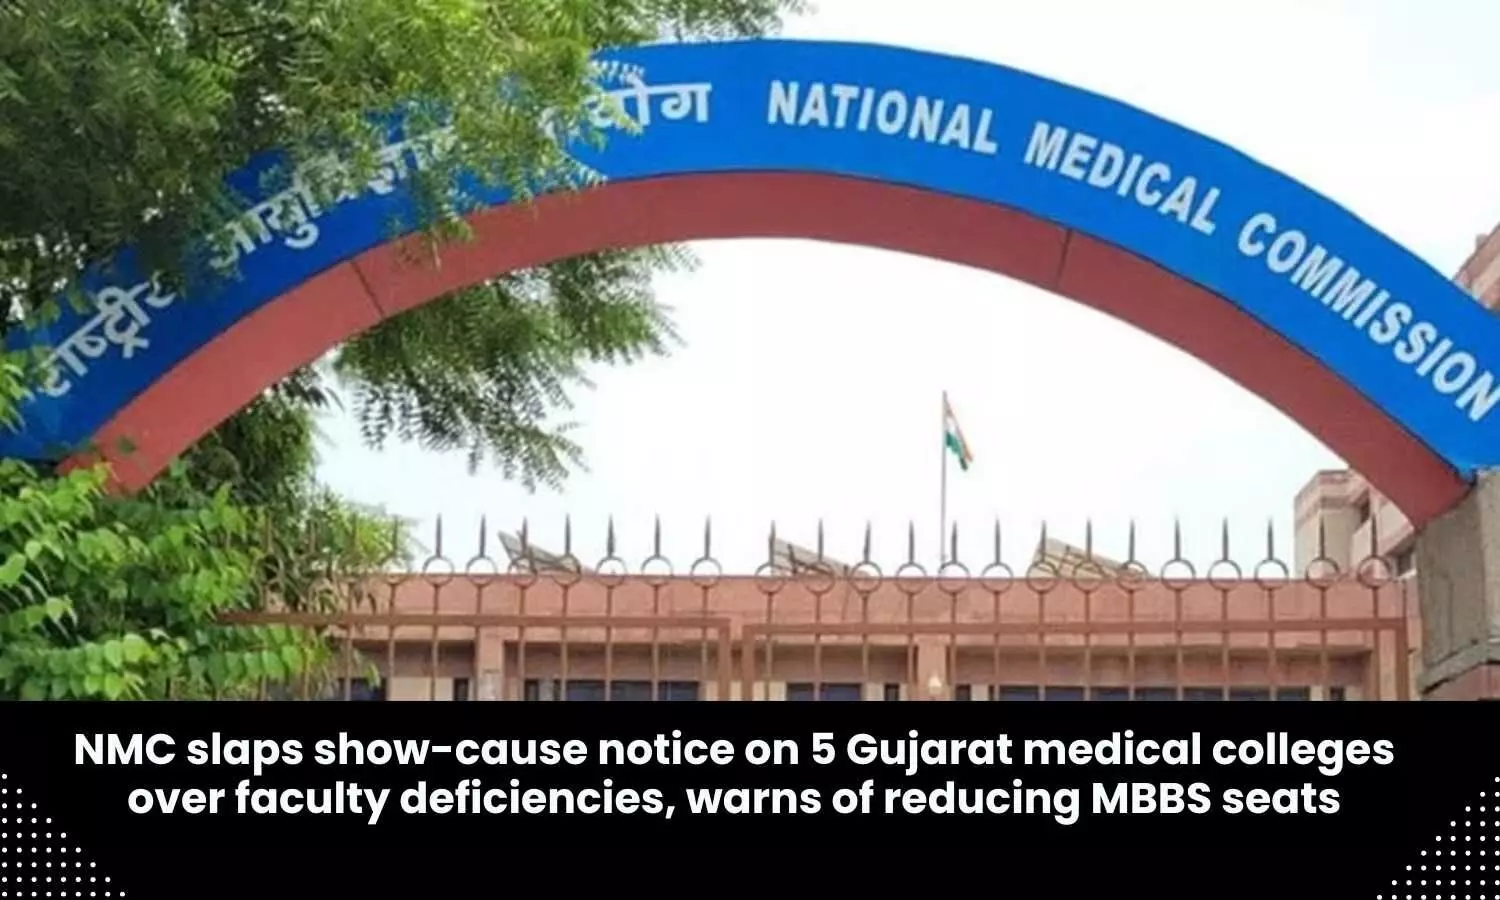 5 Gujarat medical colleges gets NMC show-cause notice over faculty deficiencies